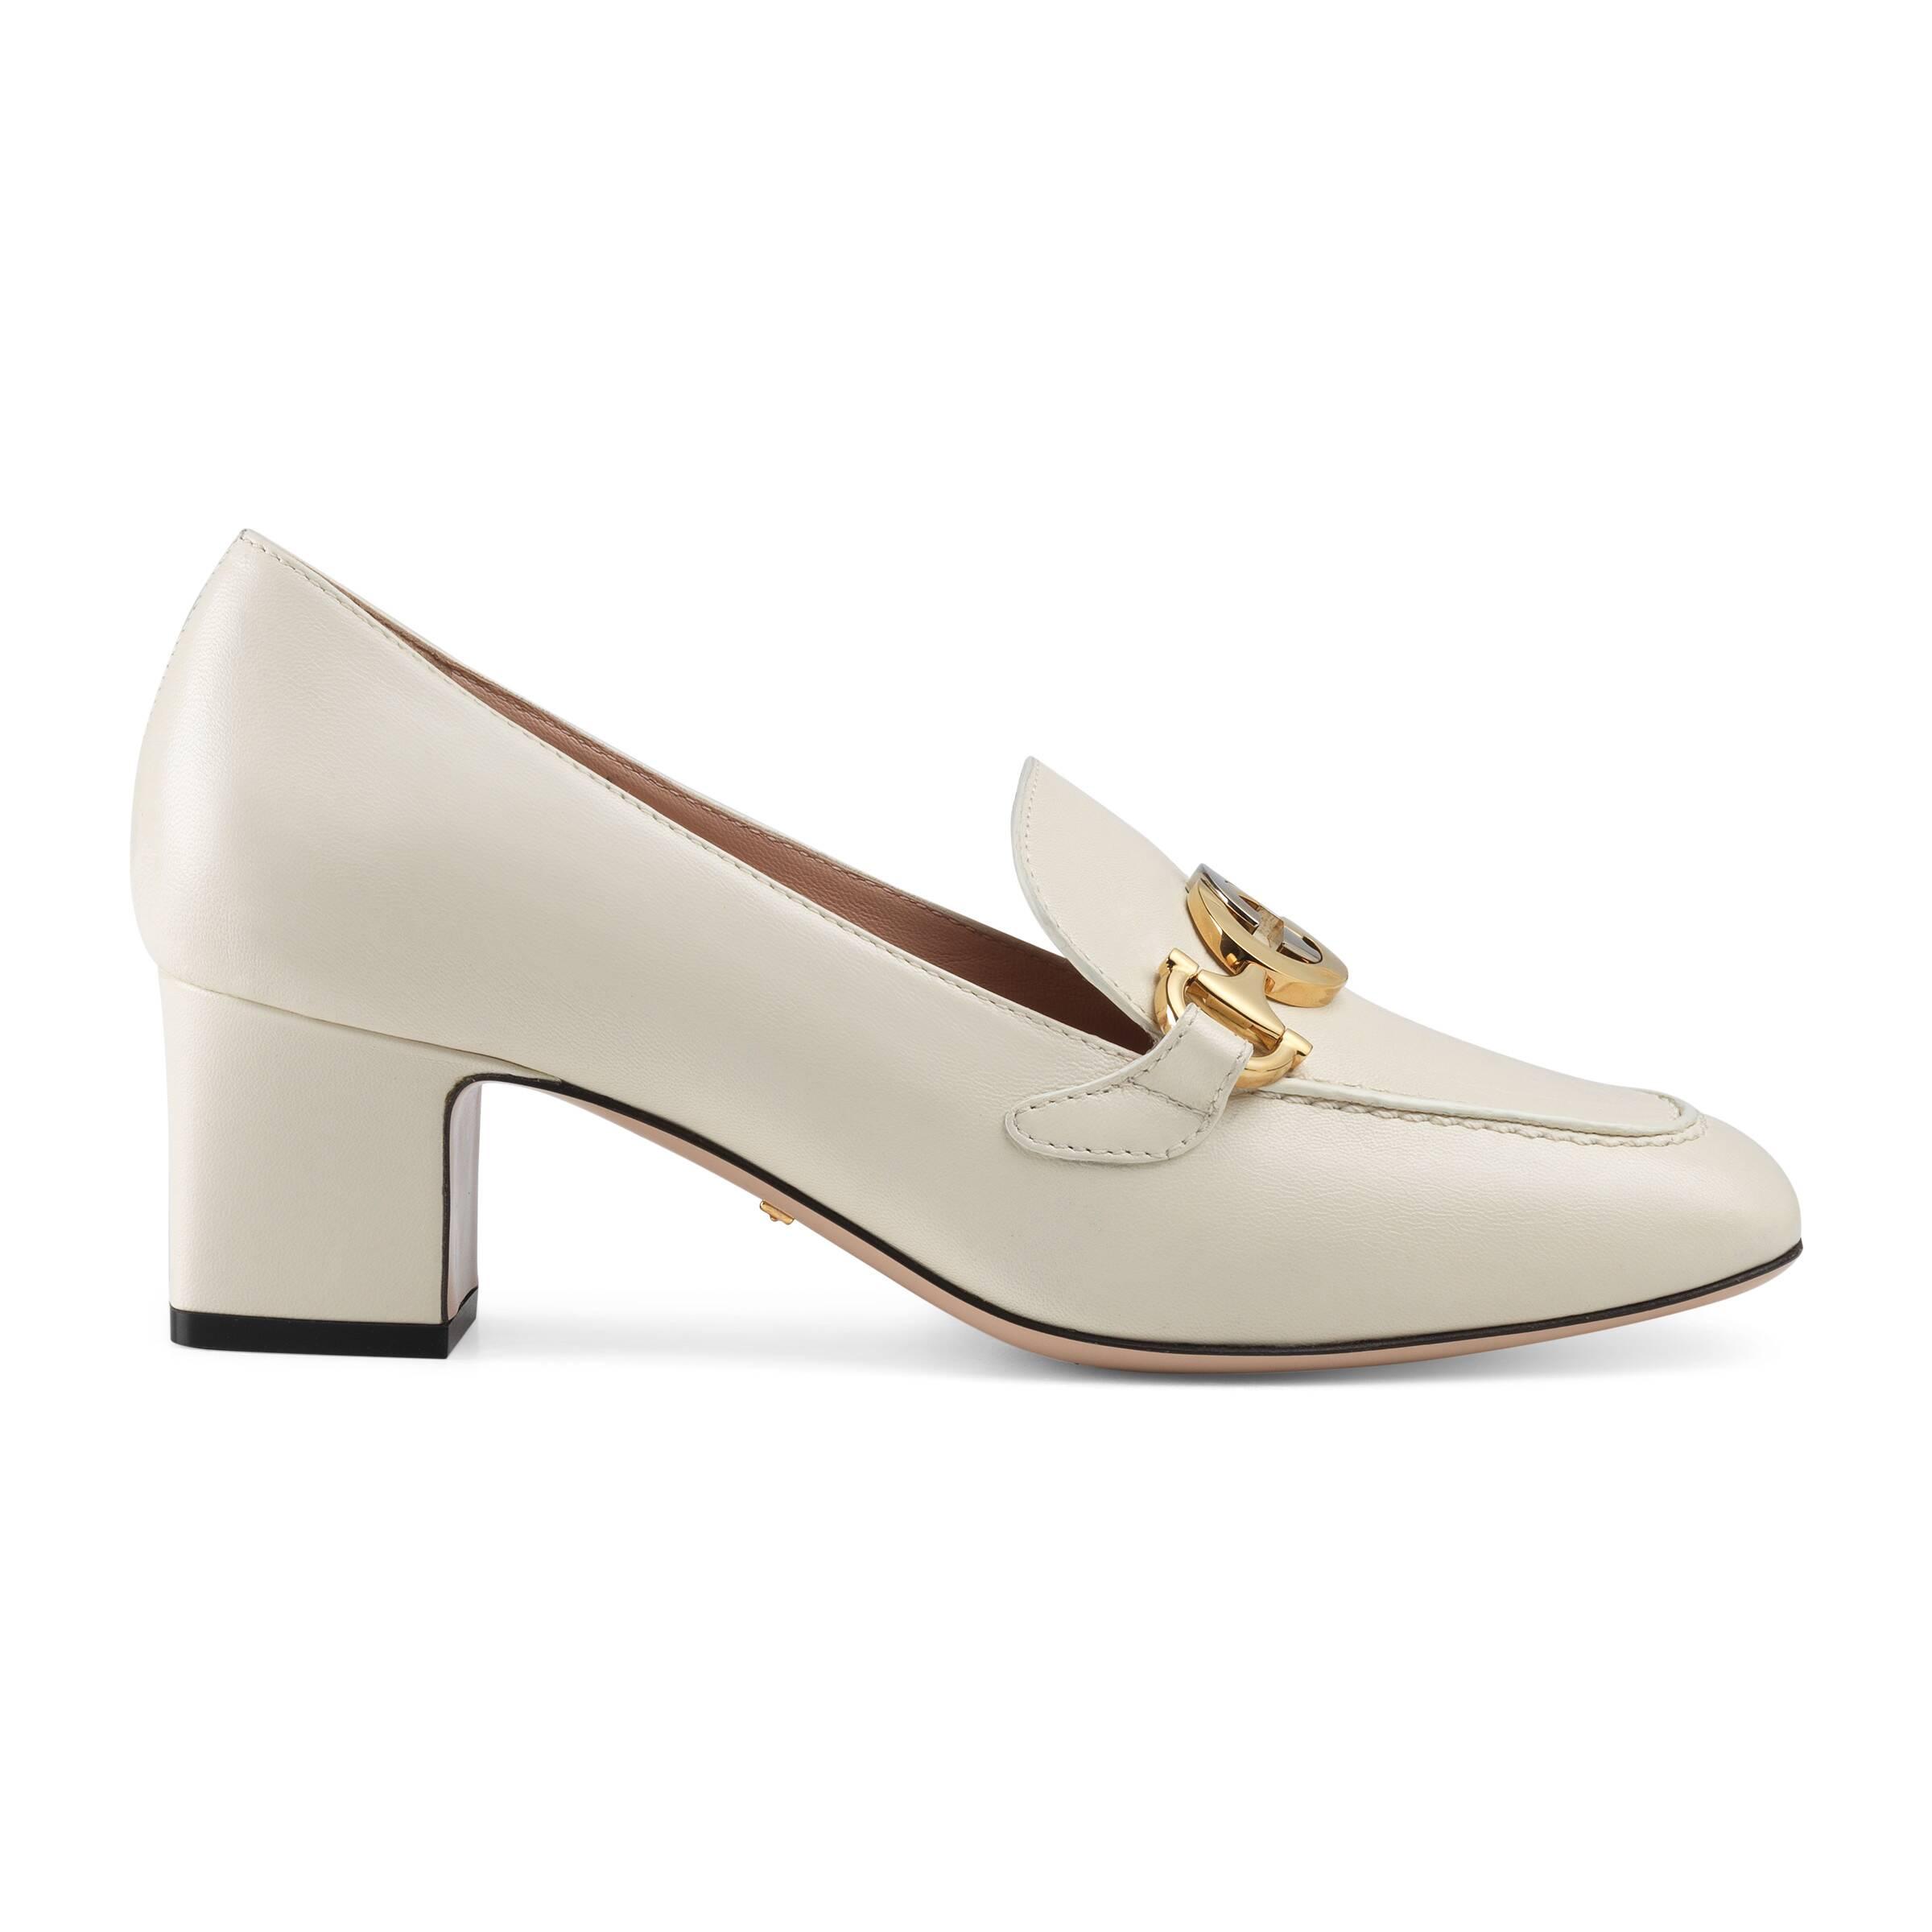 Gucci Zumi Leather Mid-heel Loafer in White Leather (White) - Lyst